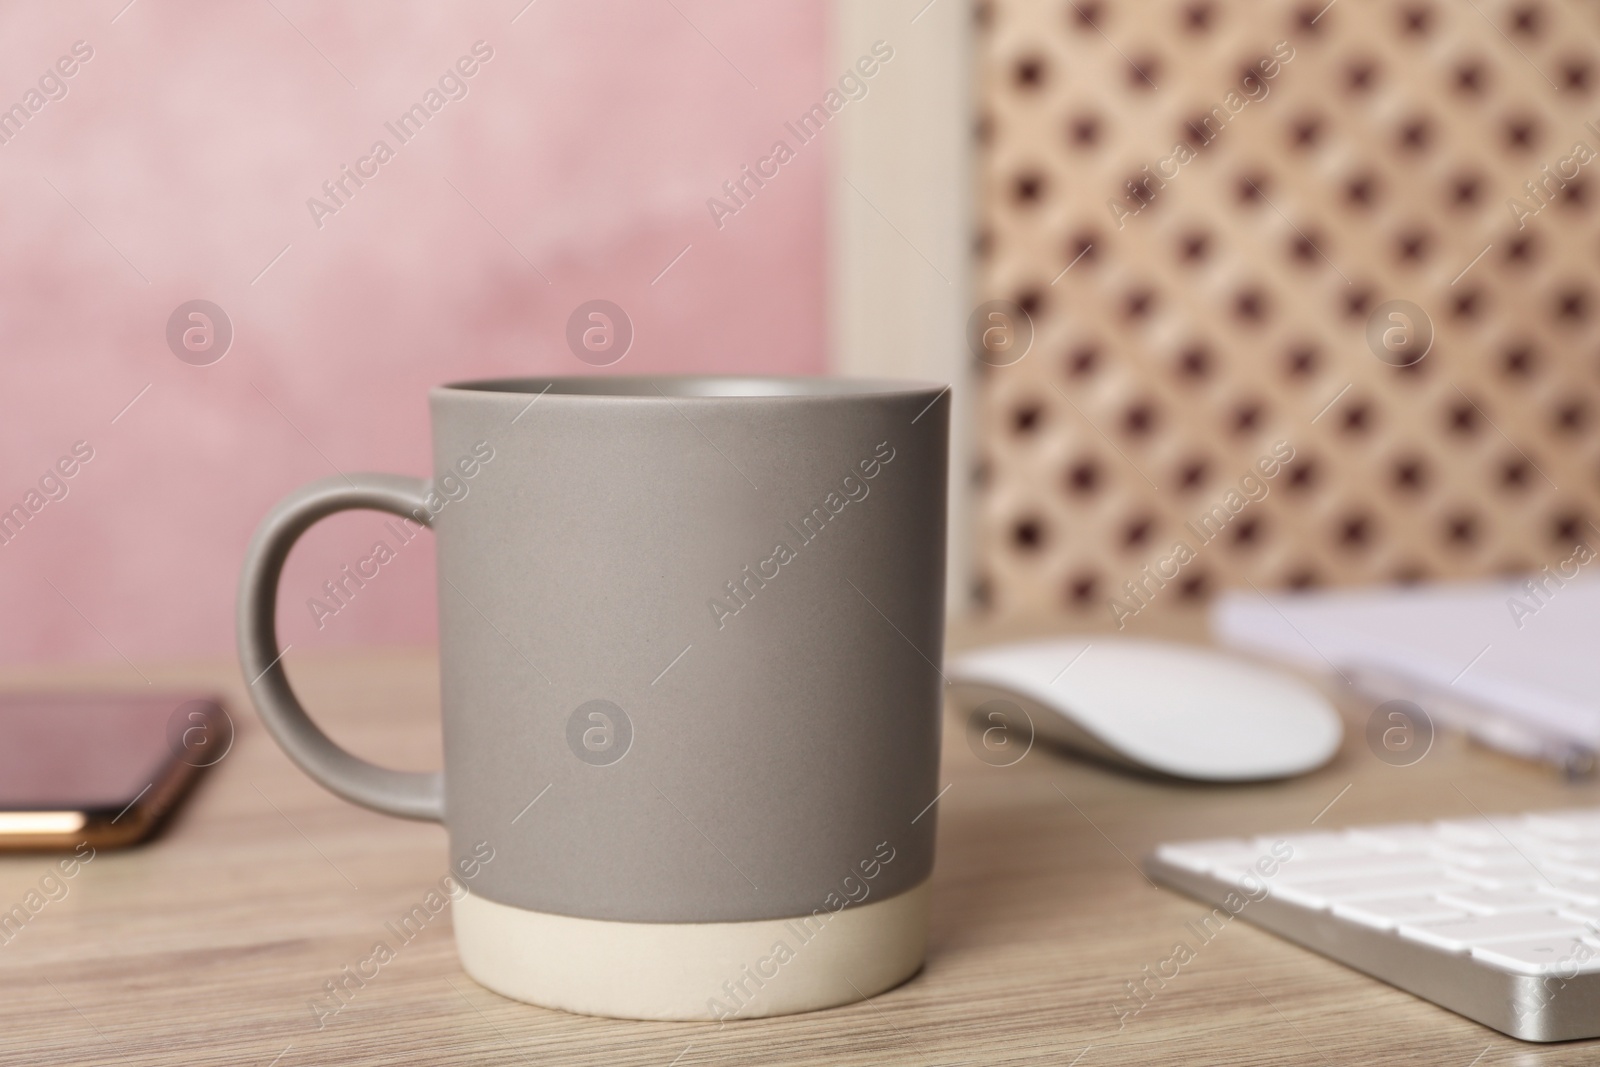 Photo of Coffee Break at workplace. Cup of hot drink on wooden table